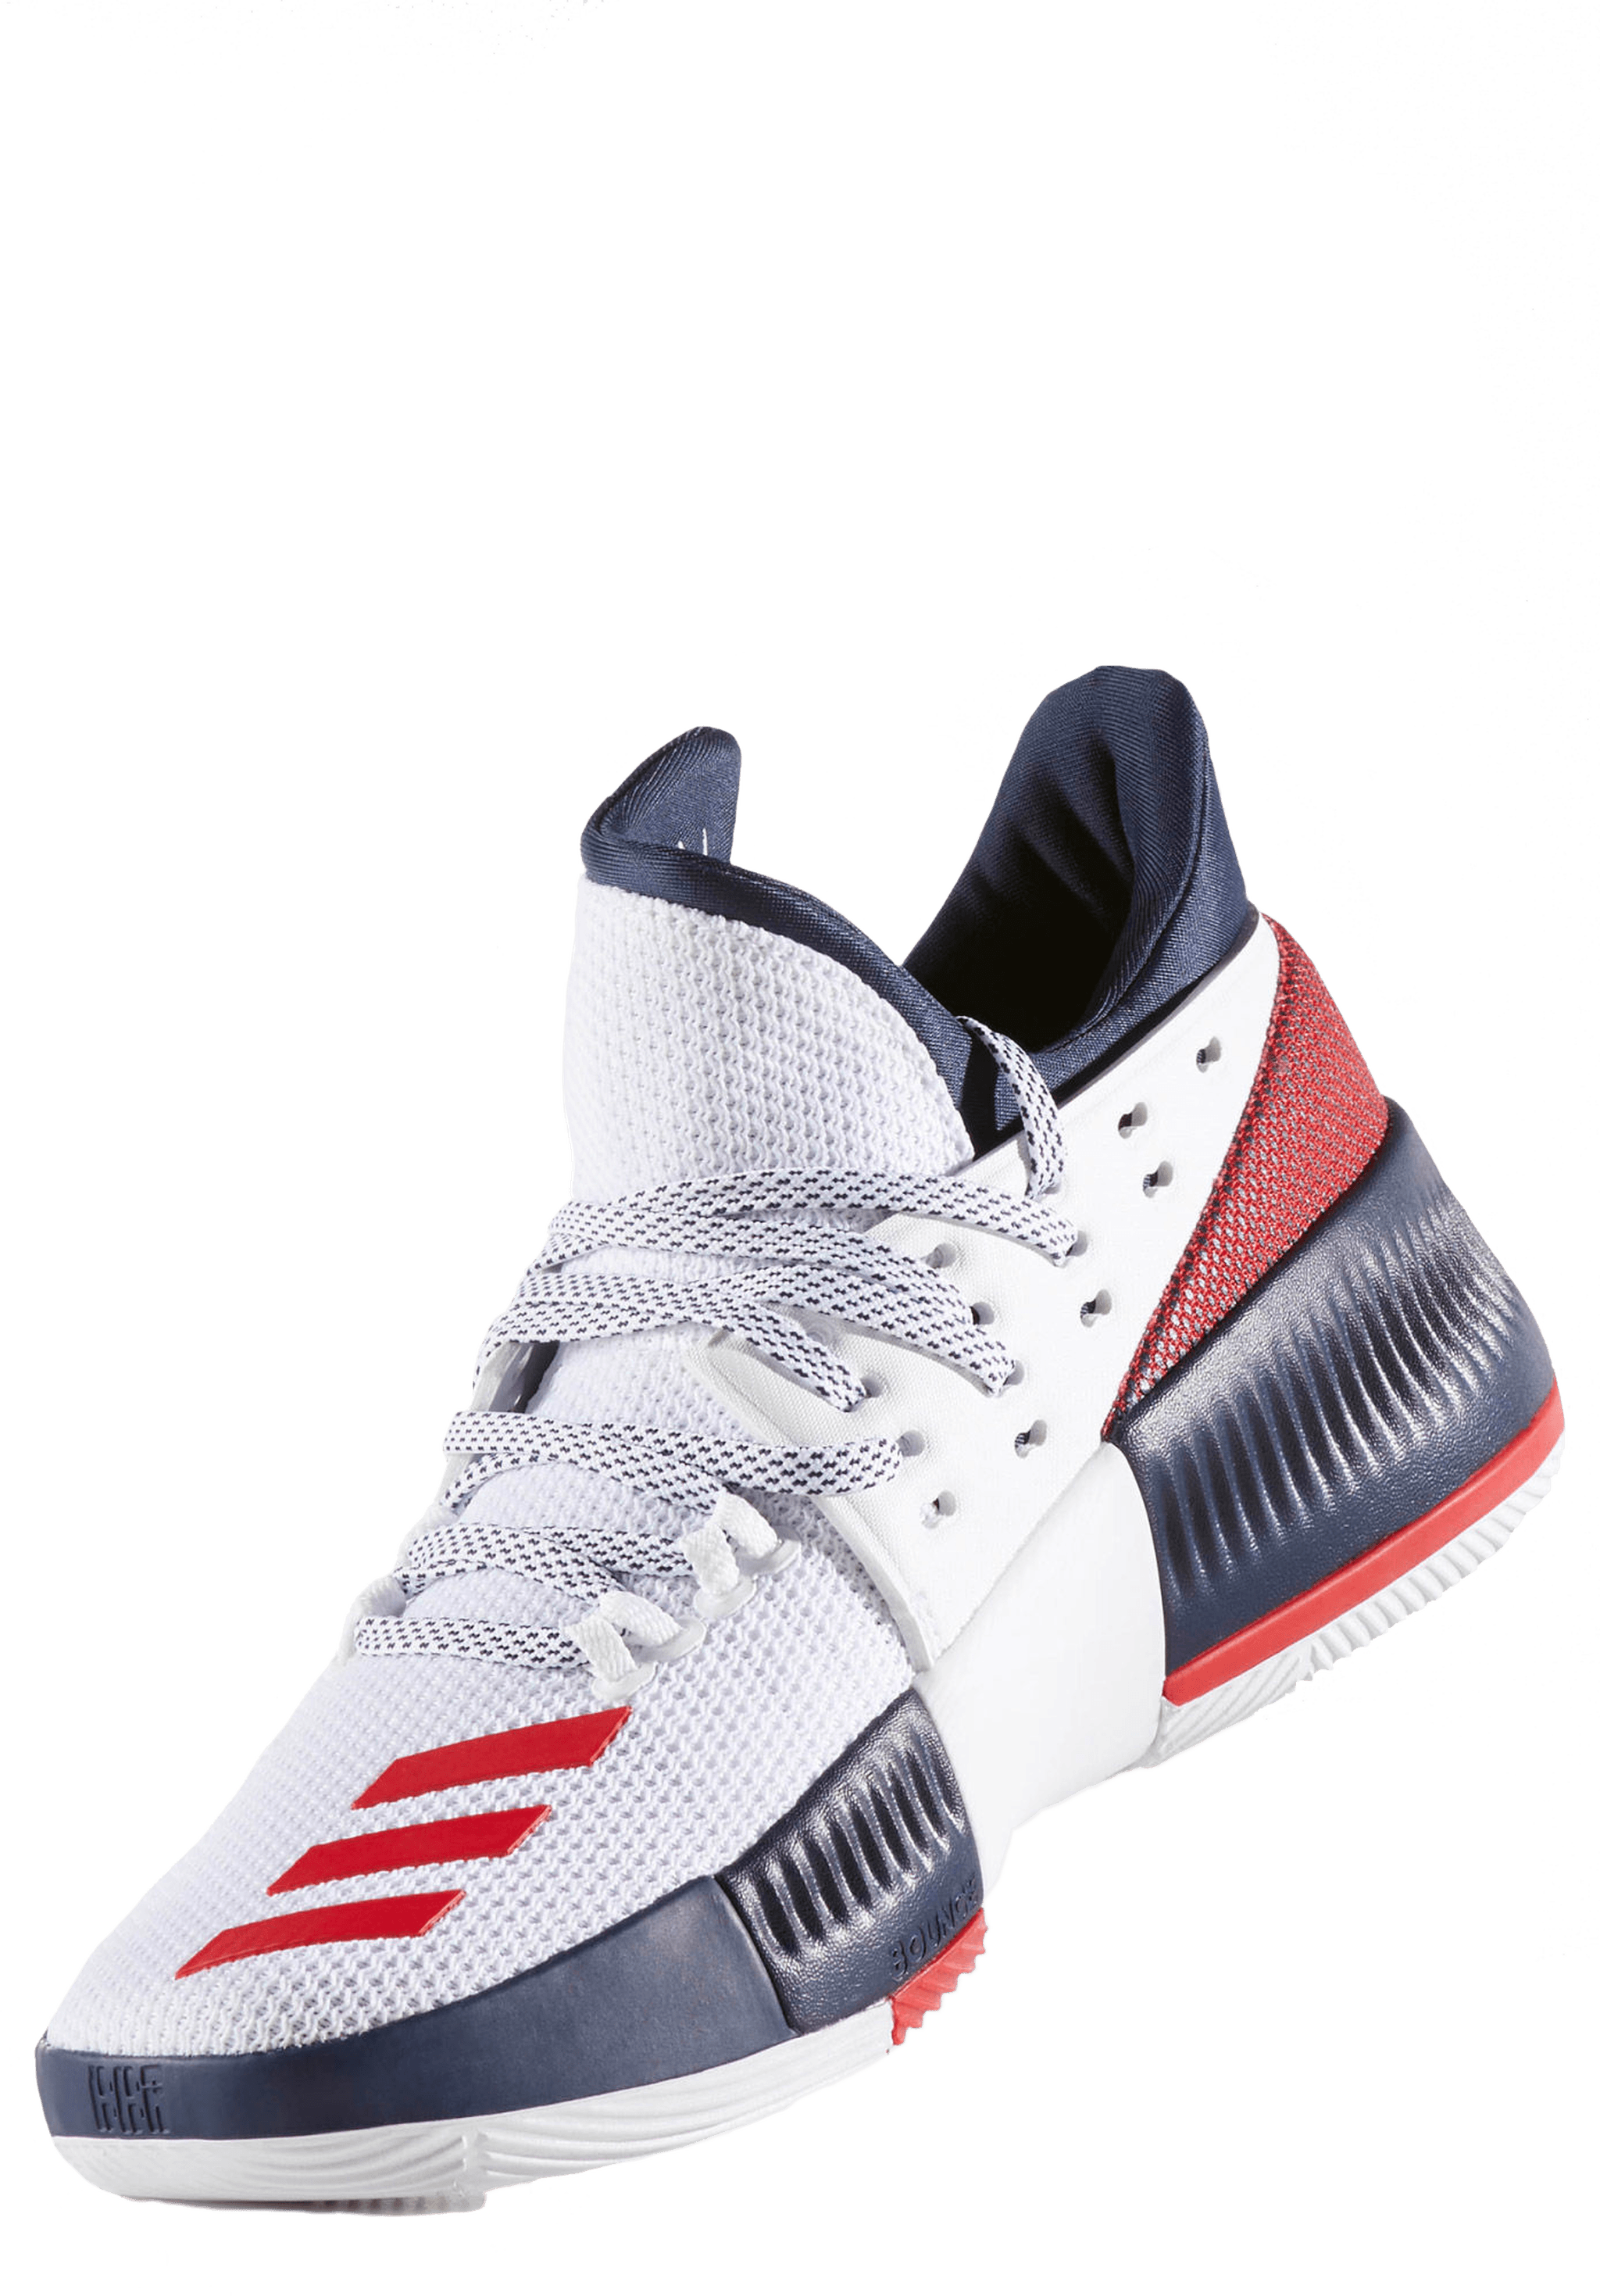 dame 3 shoes